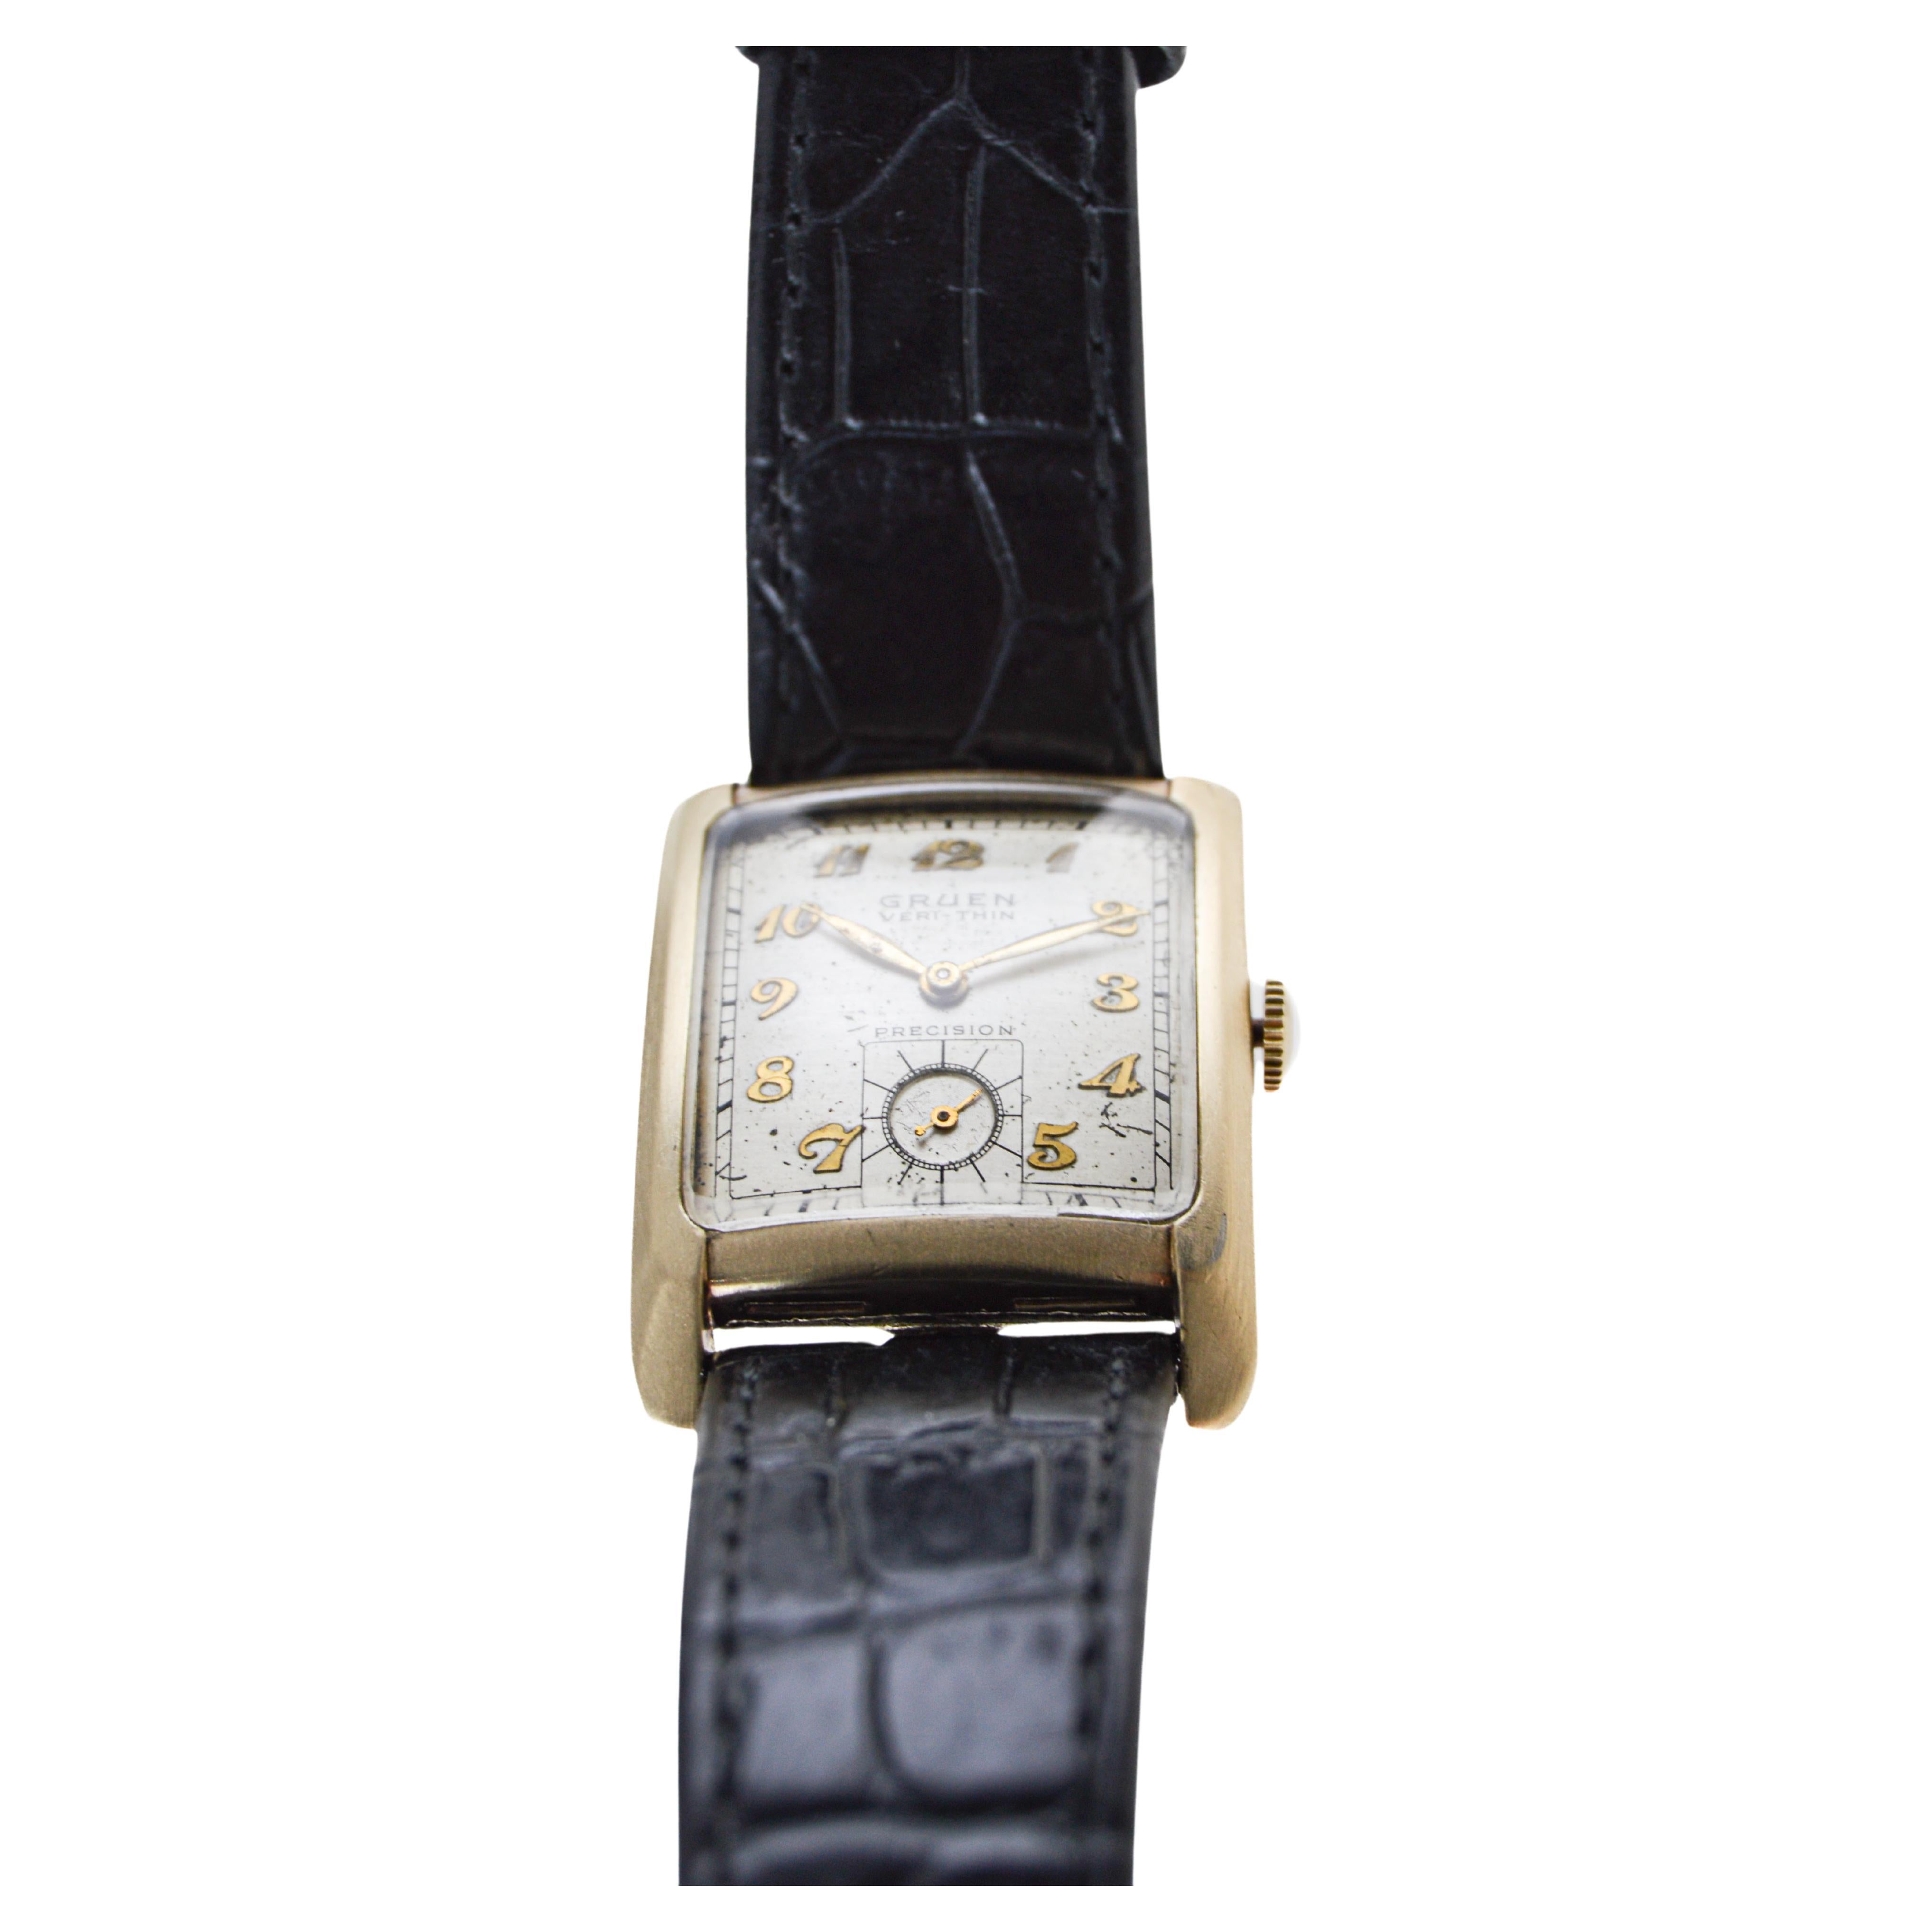 Gruen Gold Filled Art Deco Watch with Original Dial from 1940's In Excellent Condition For Sale In Long Beach, CA